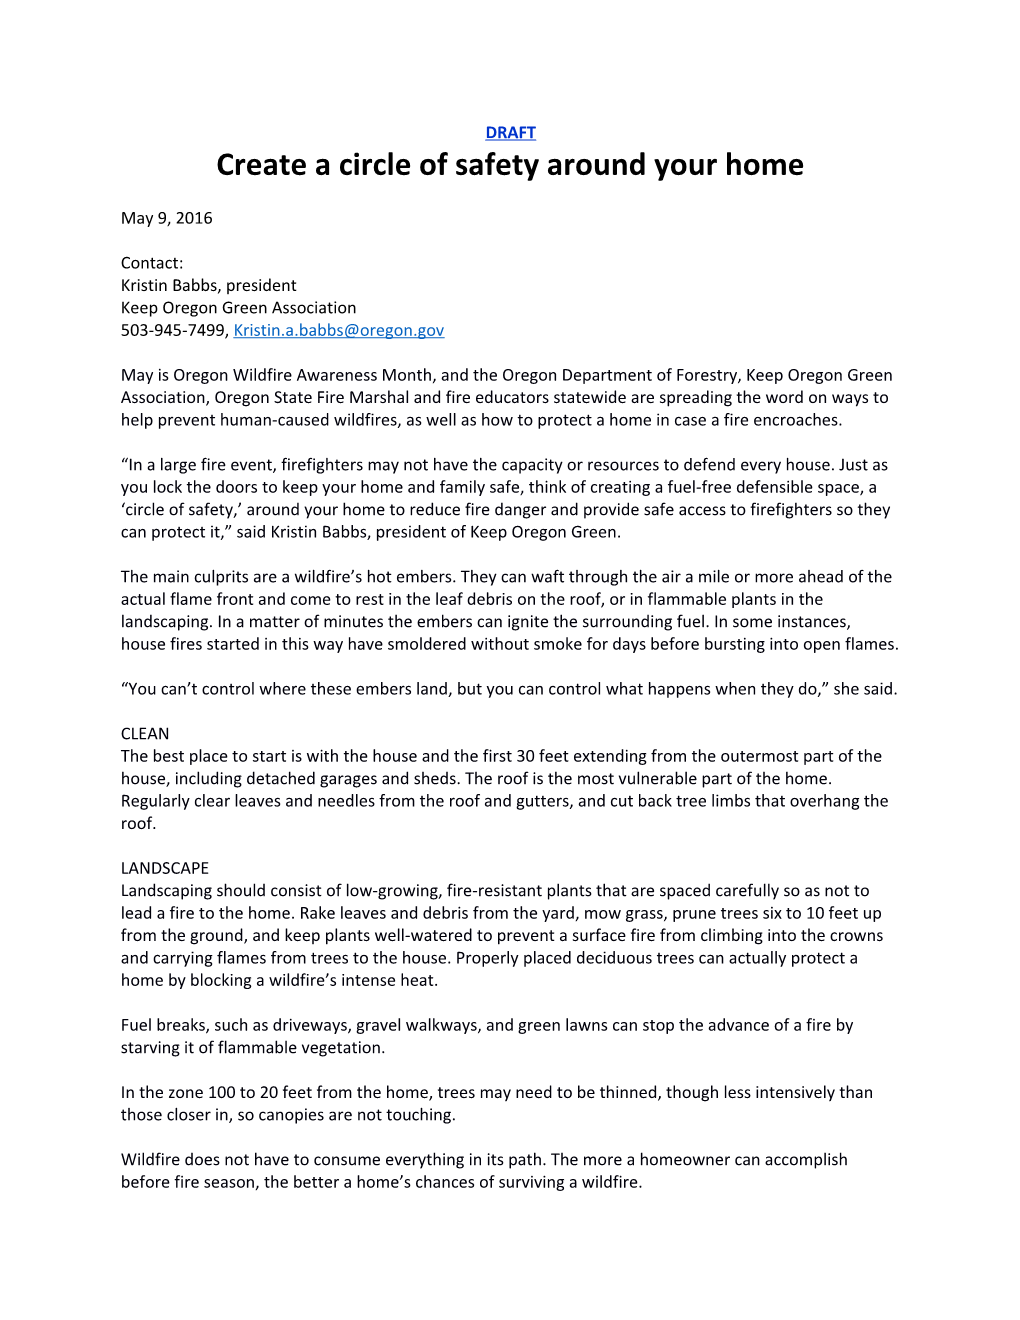 Create a Circle of Safety Around Your Home